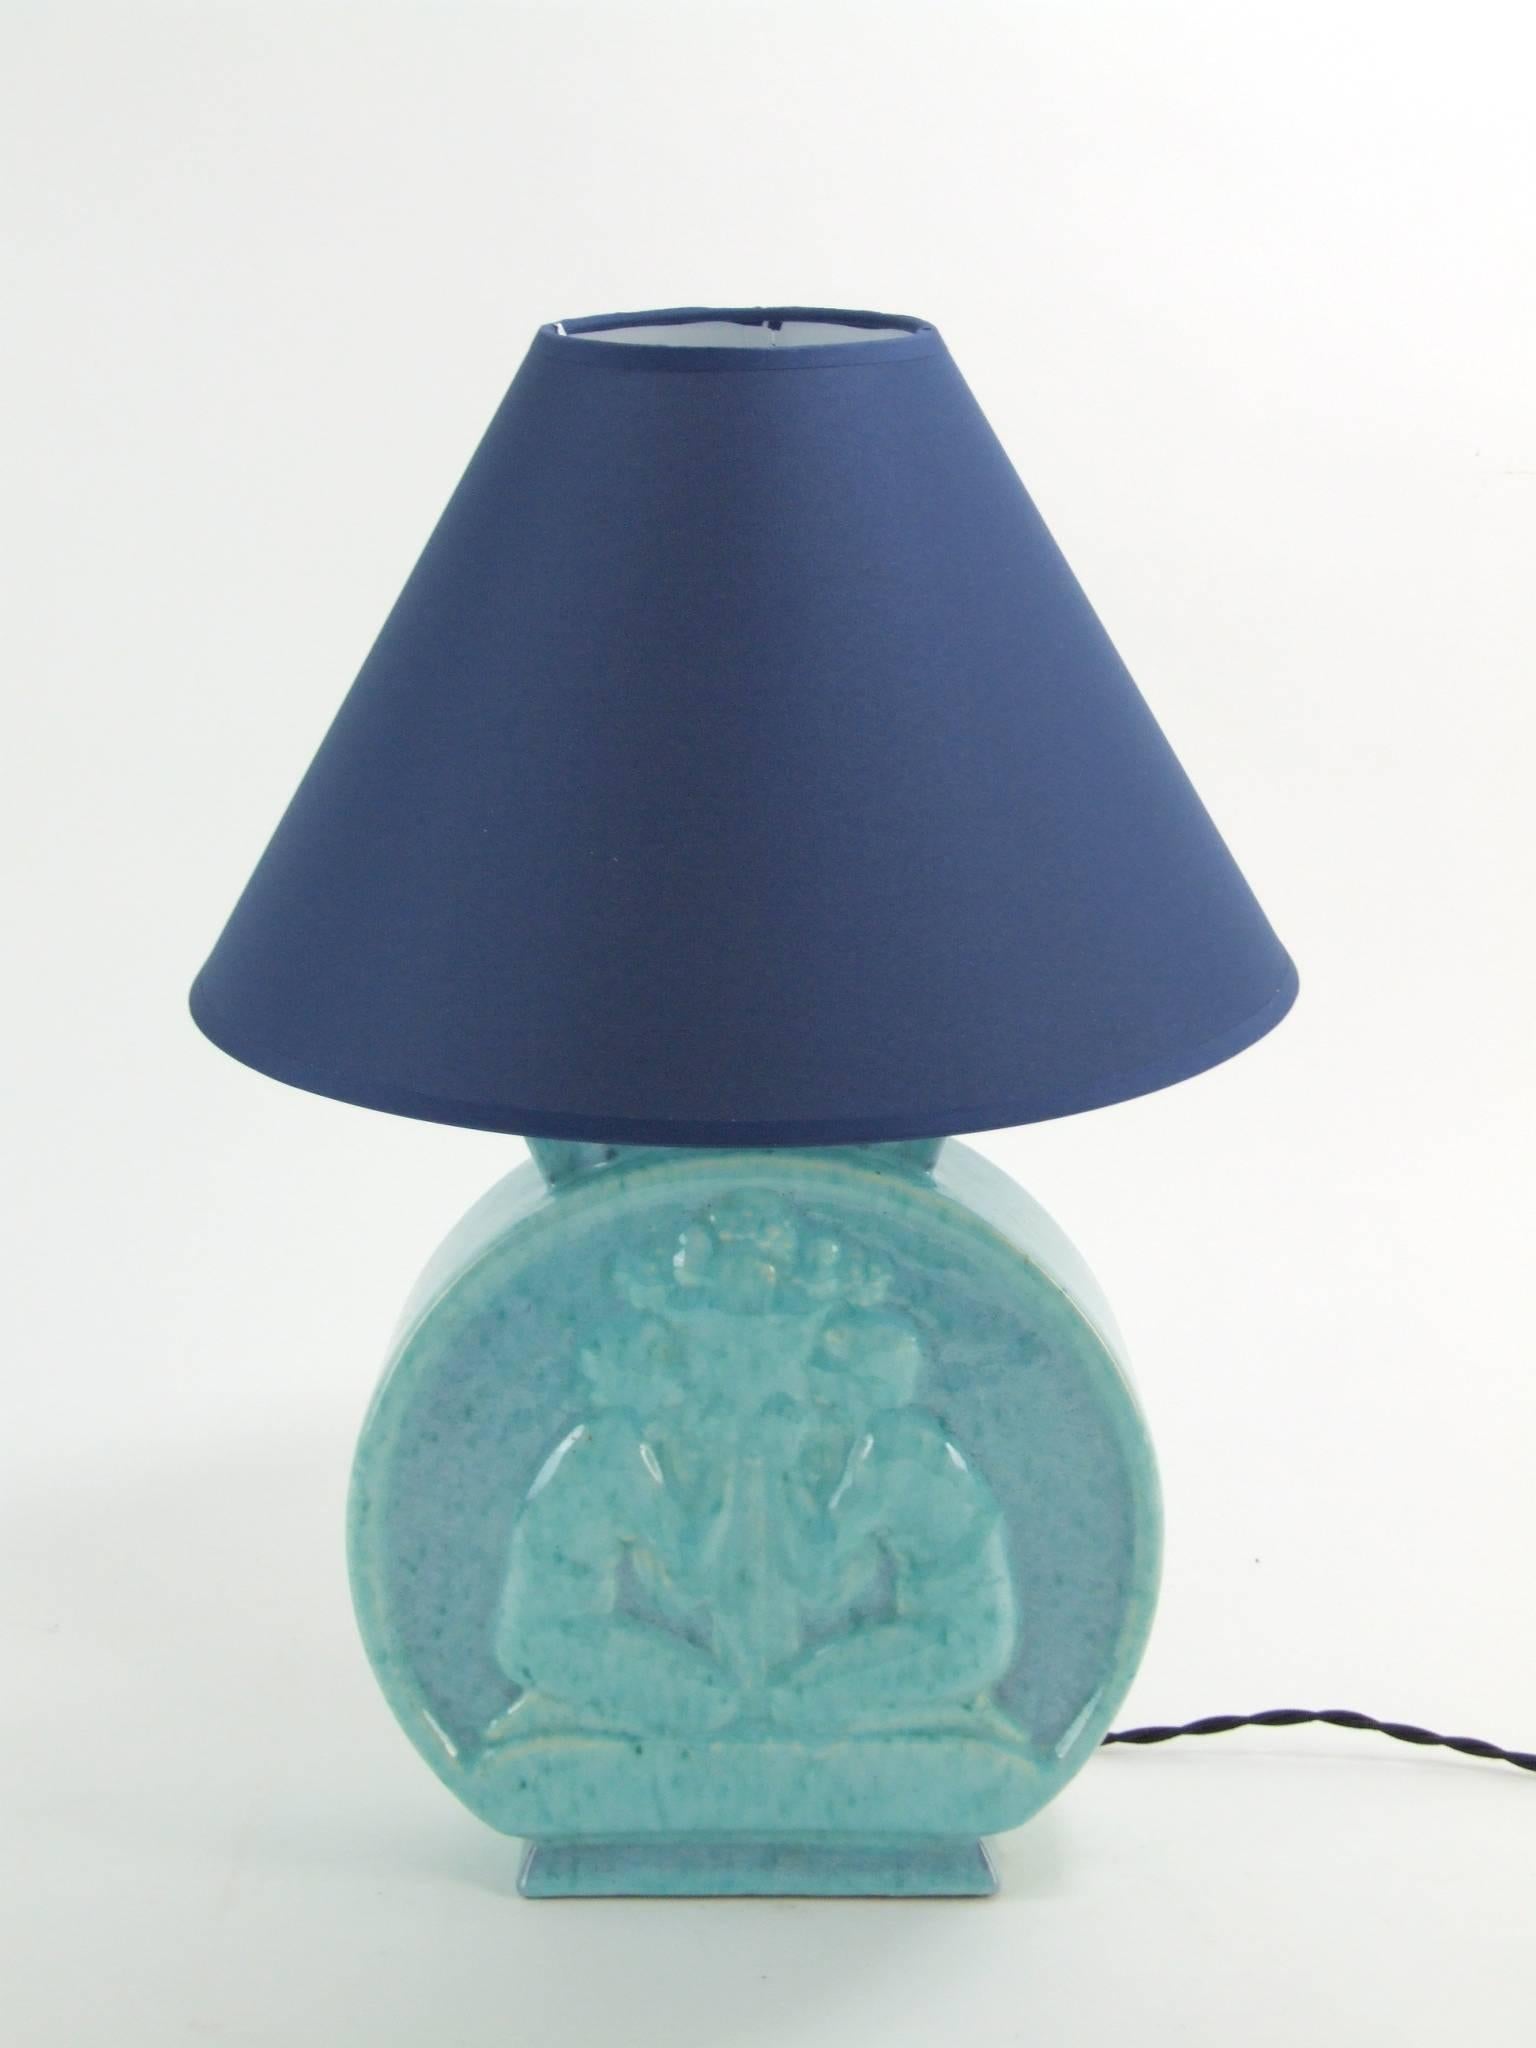 Art deco glazed terracotta table lamp. Designed by Andre Fau and produced by the Marcel Guillard foundry during the 1920s. Marked Boulogne under the base and bearing a foundry stamp and made in France. The shade measures. 12 inches in diameter and